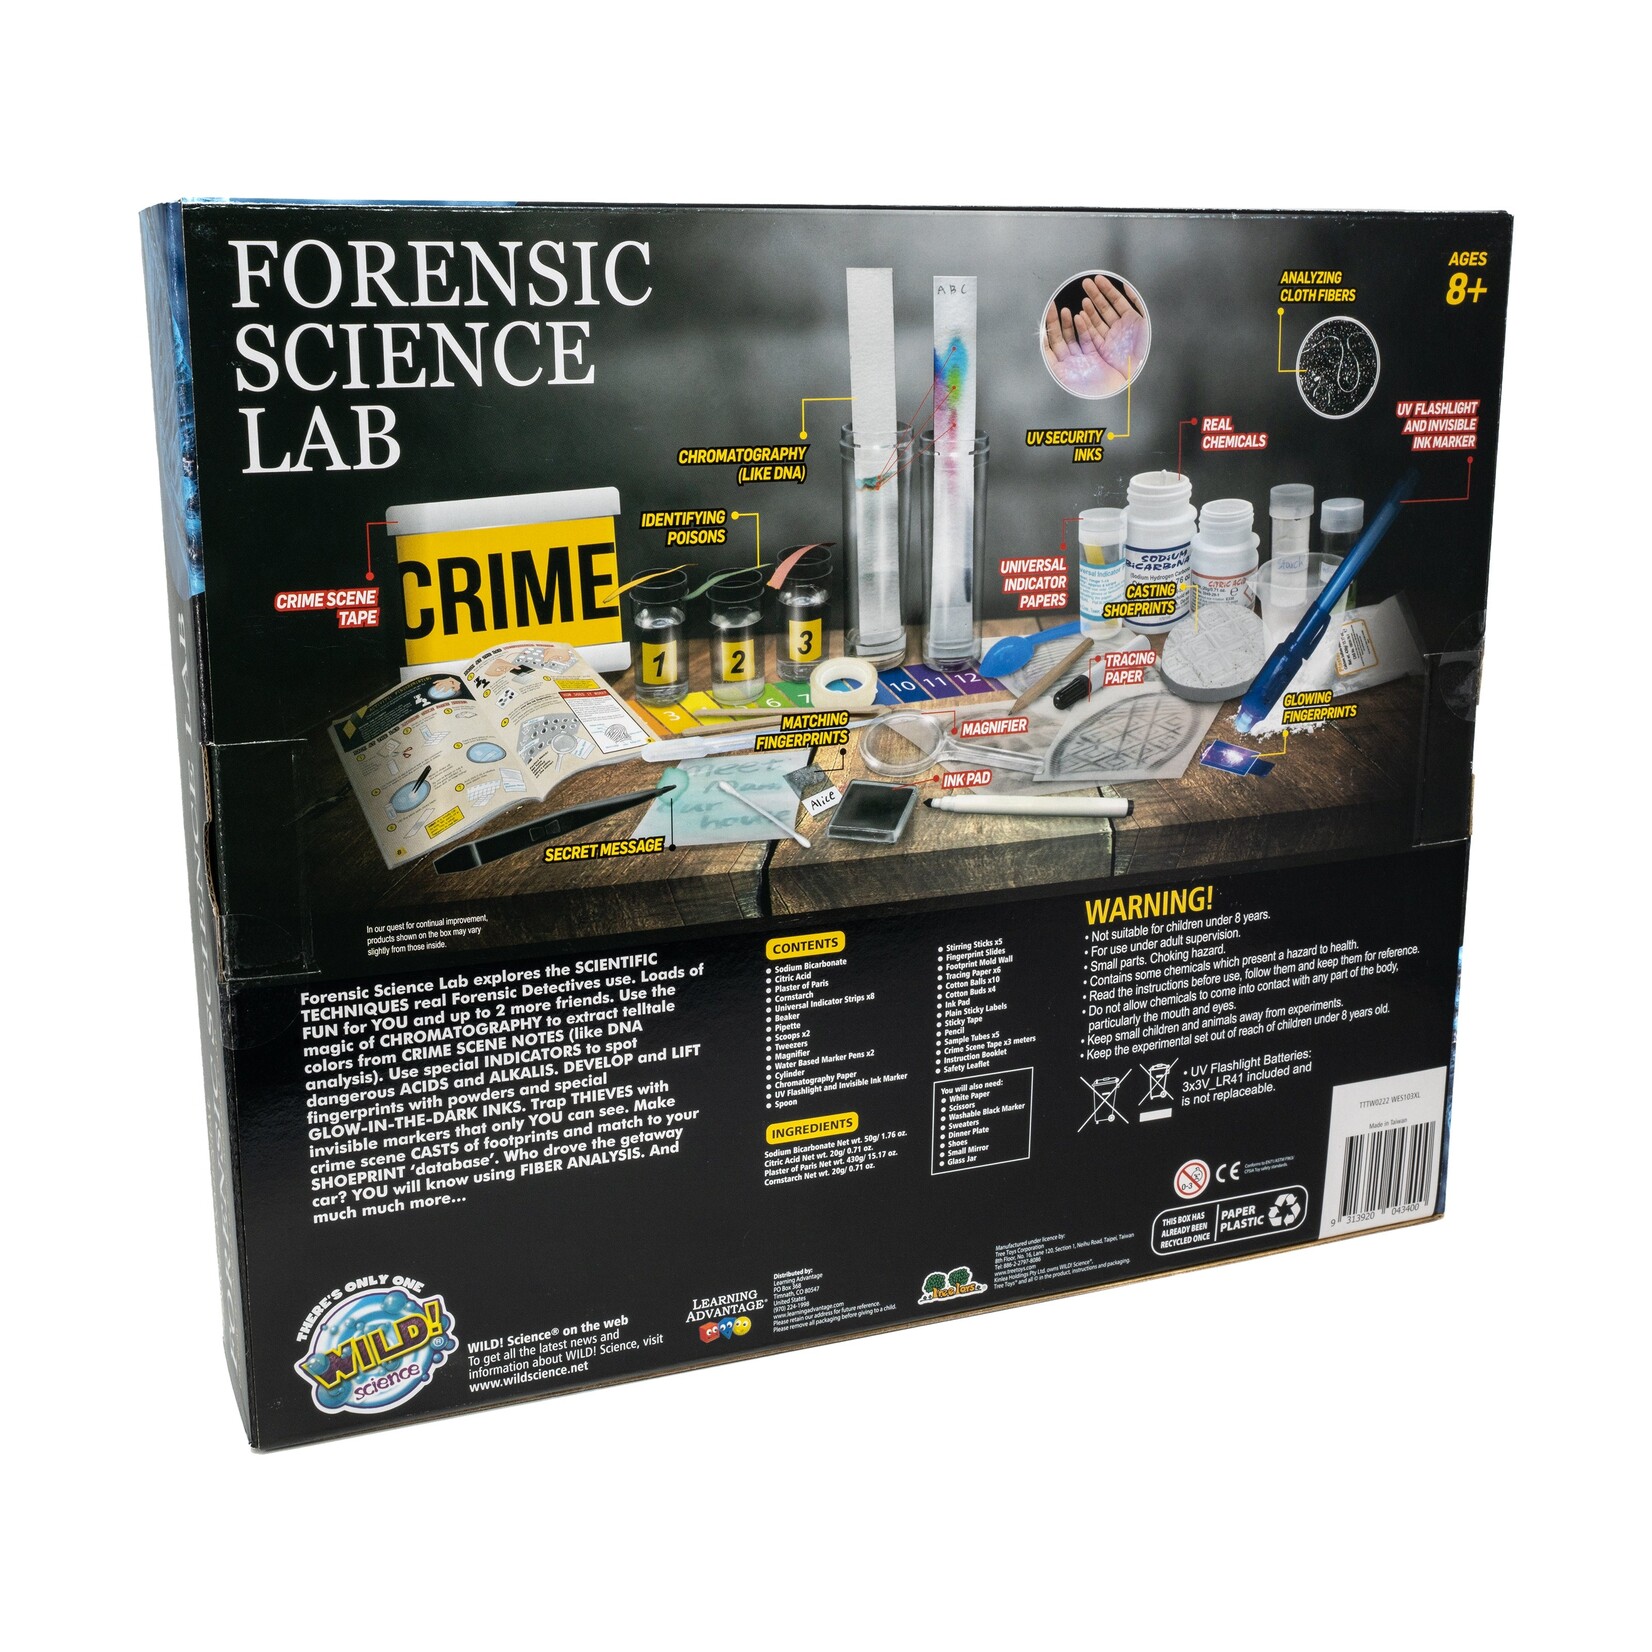 Forensic Science Lab